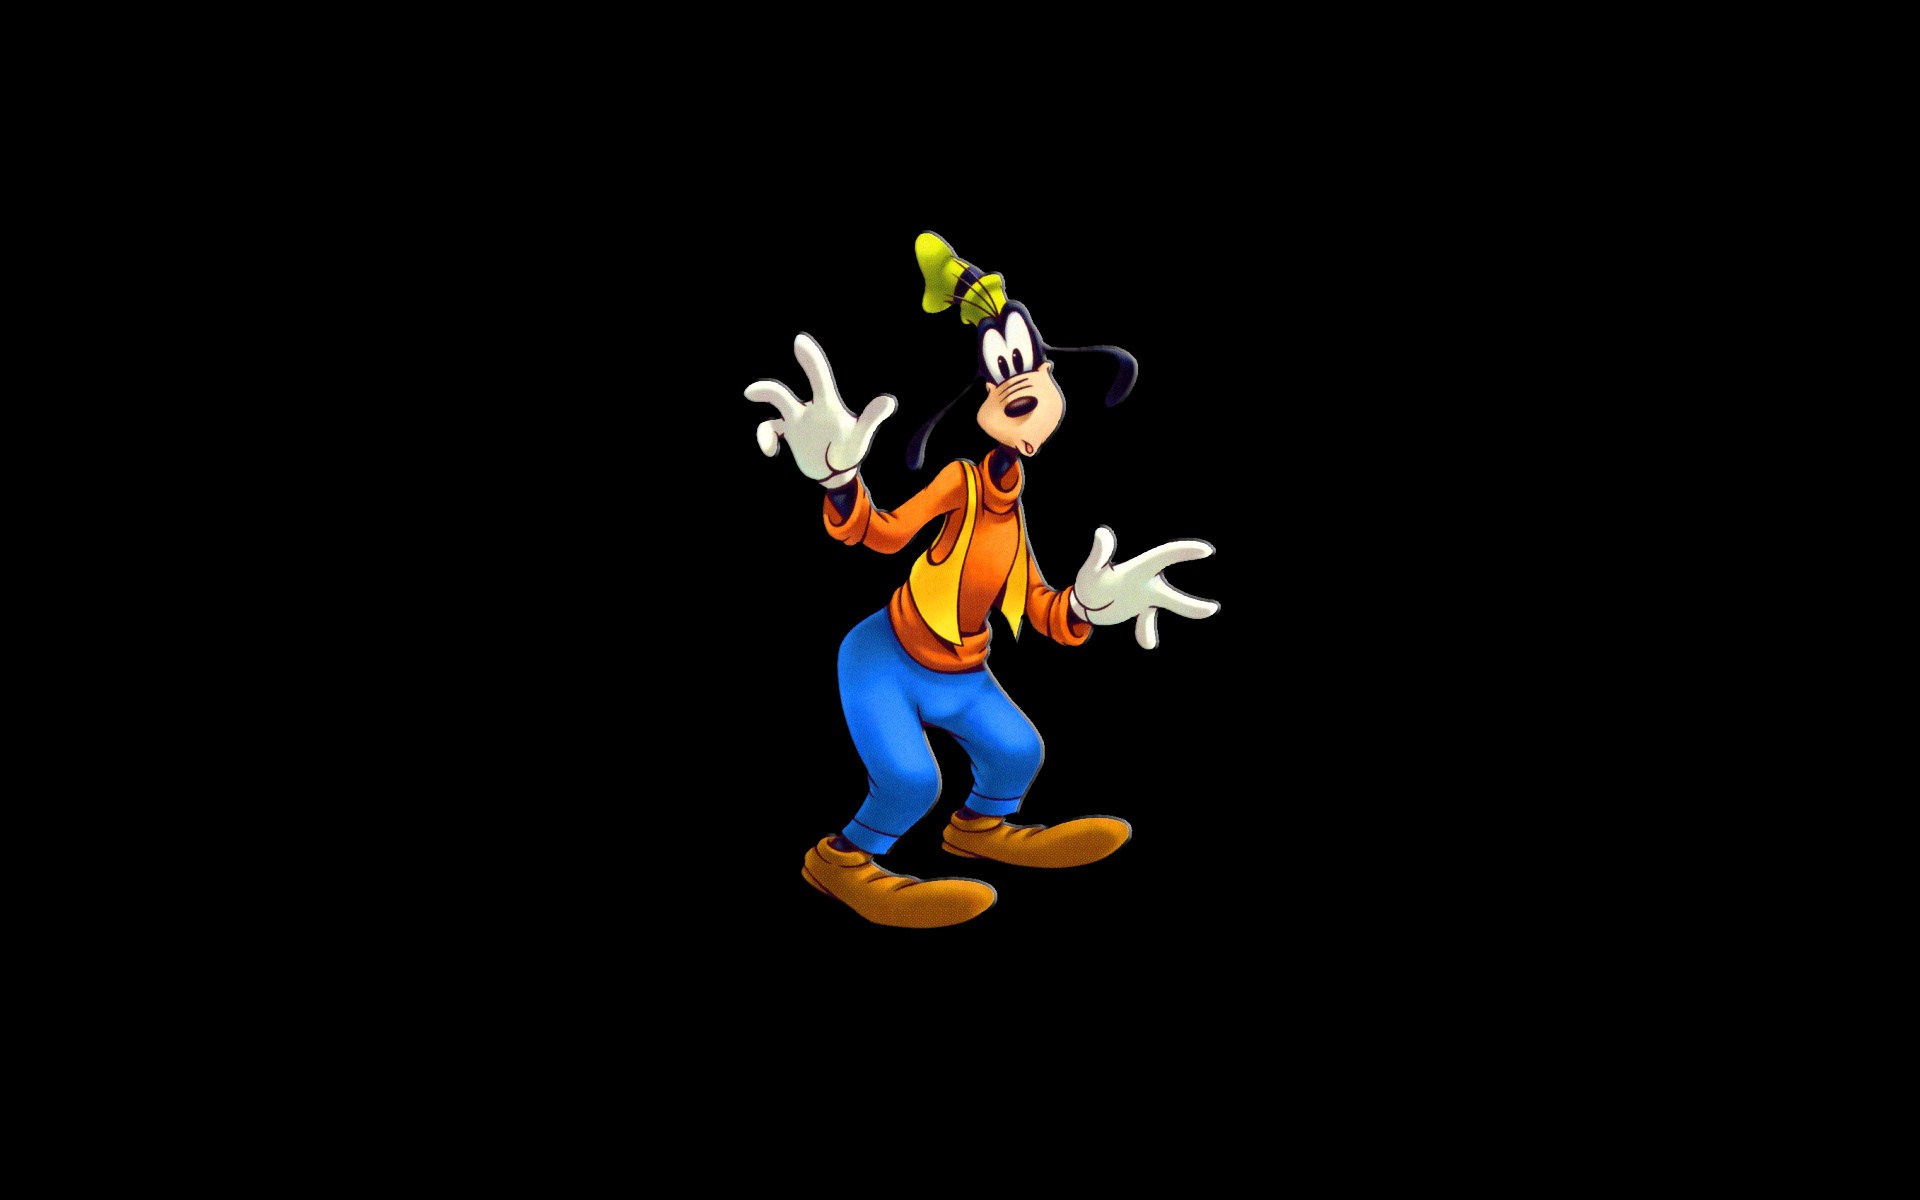 Free download New Funny Disney Photo View 816471 Wallpaper RiseWLP [1920x1200] for your Desktop, Mobile & Tablet. Explore Goofy Background. Goofy Wallpaper, Goofy Christmas Wallpaper, Goofy Desktop Wallpaper